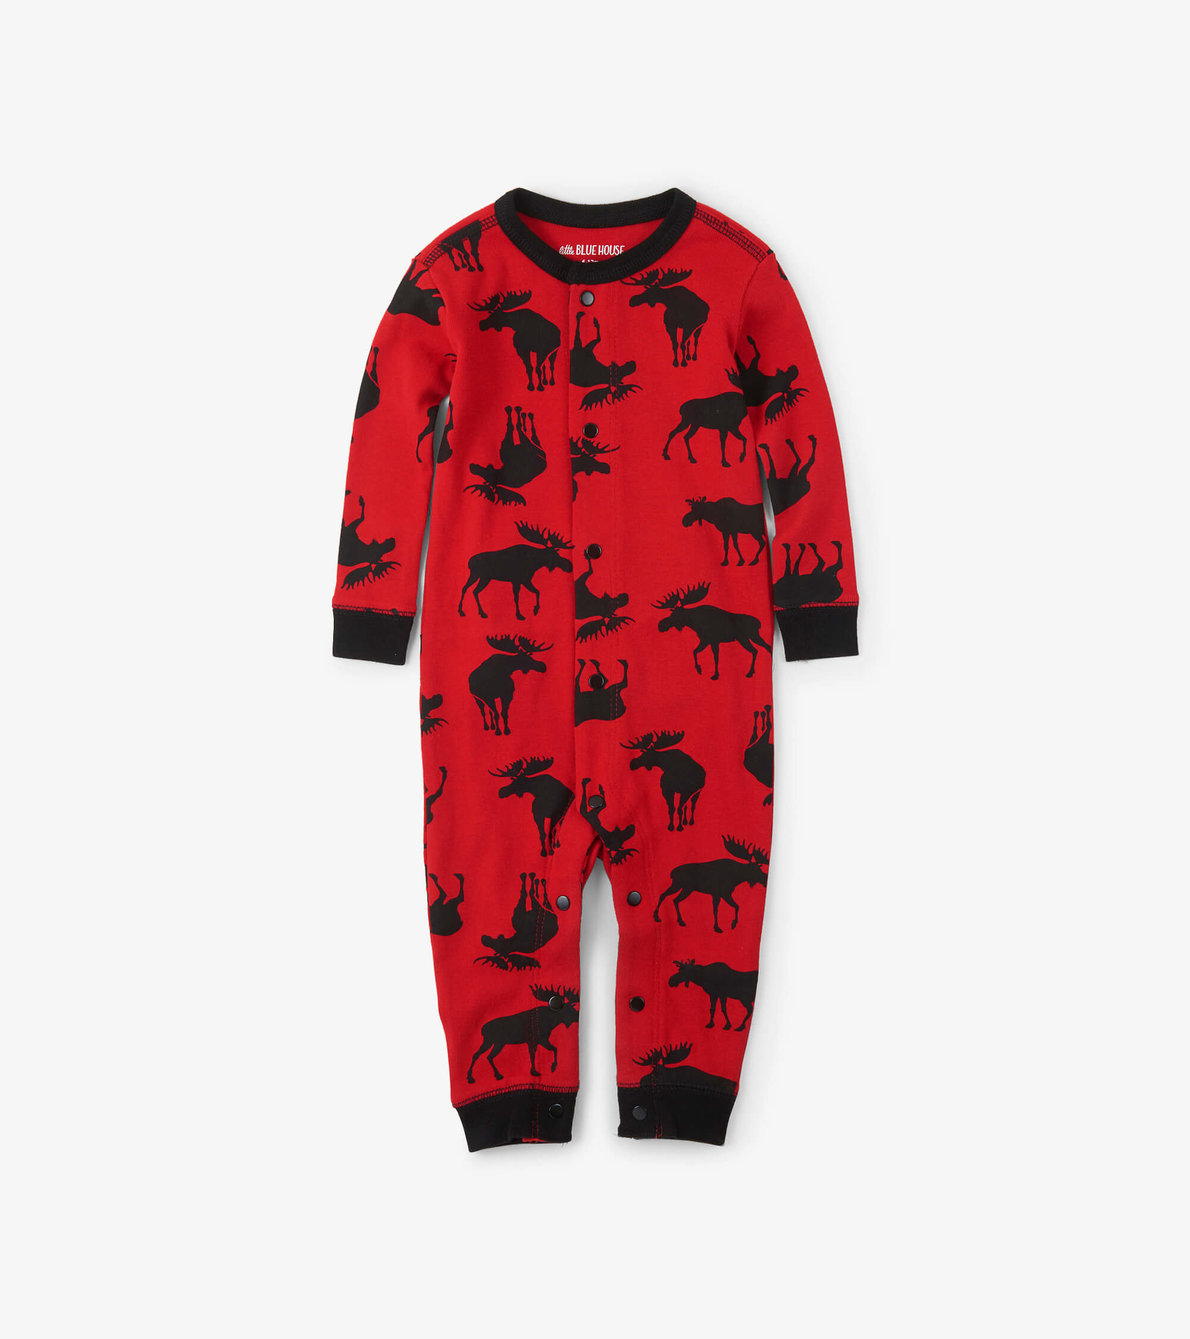 View larger image of Moose on Red "Trailing Behind" Baby Union Suit